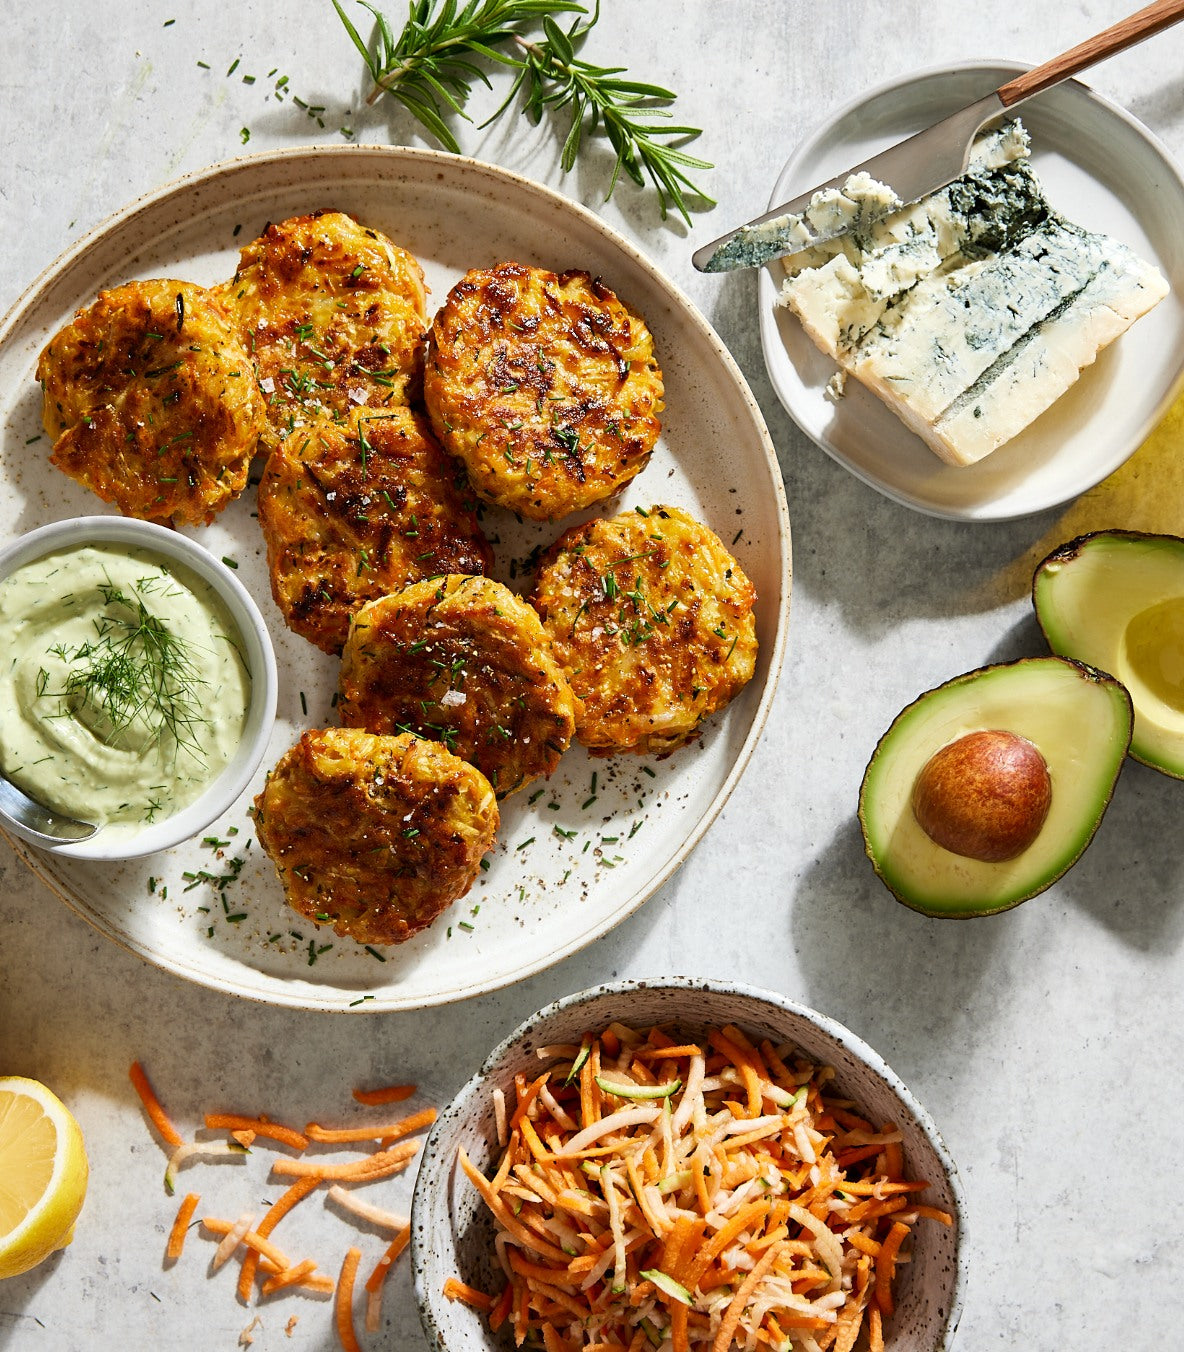 Vegetable fritters with avocado blue cheese dip